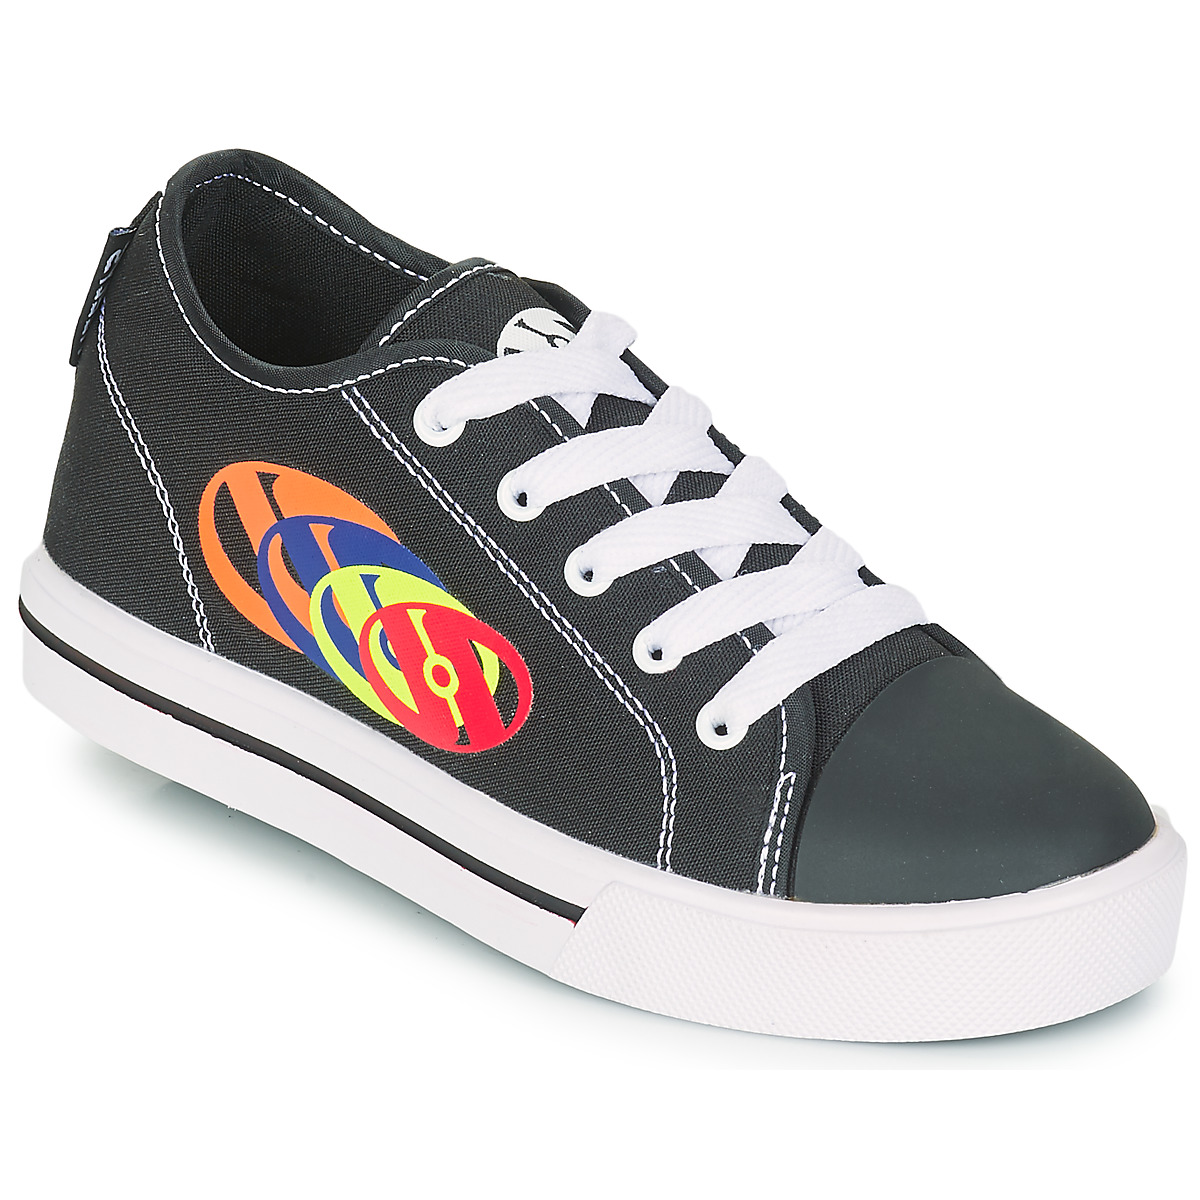 Roller shoes Heelys Classic Ύφασμα